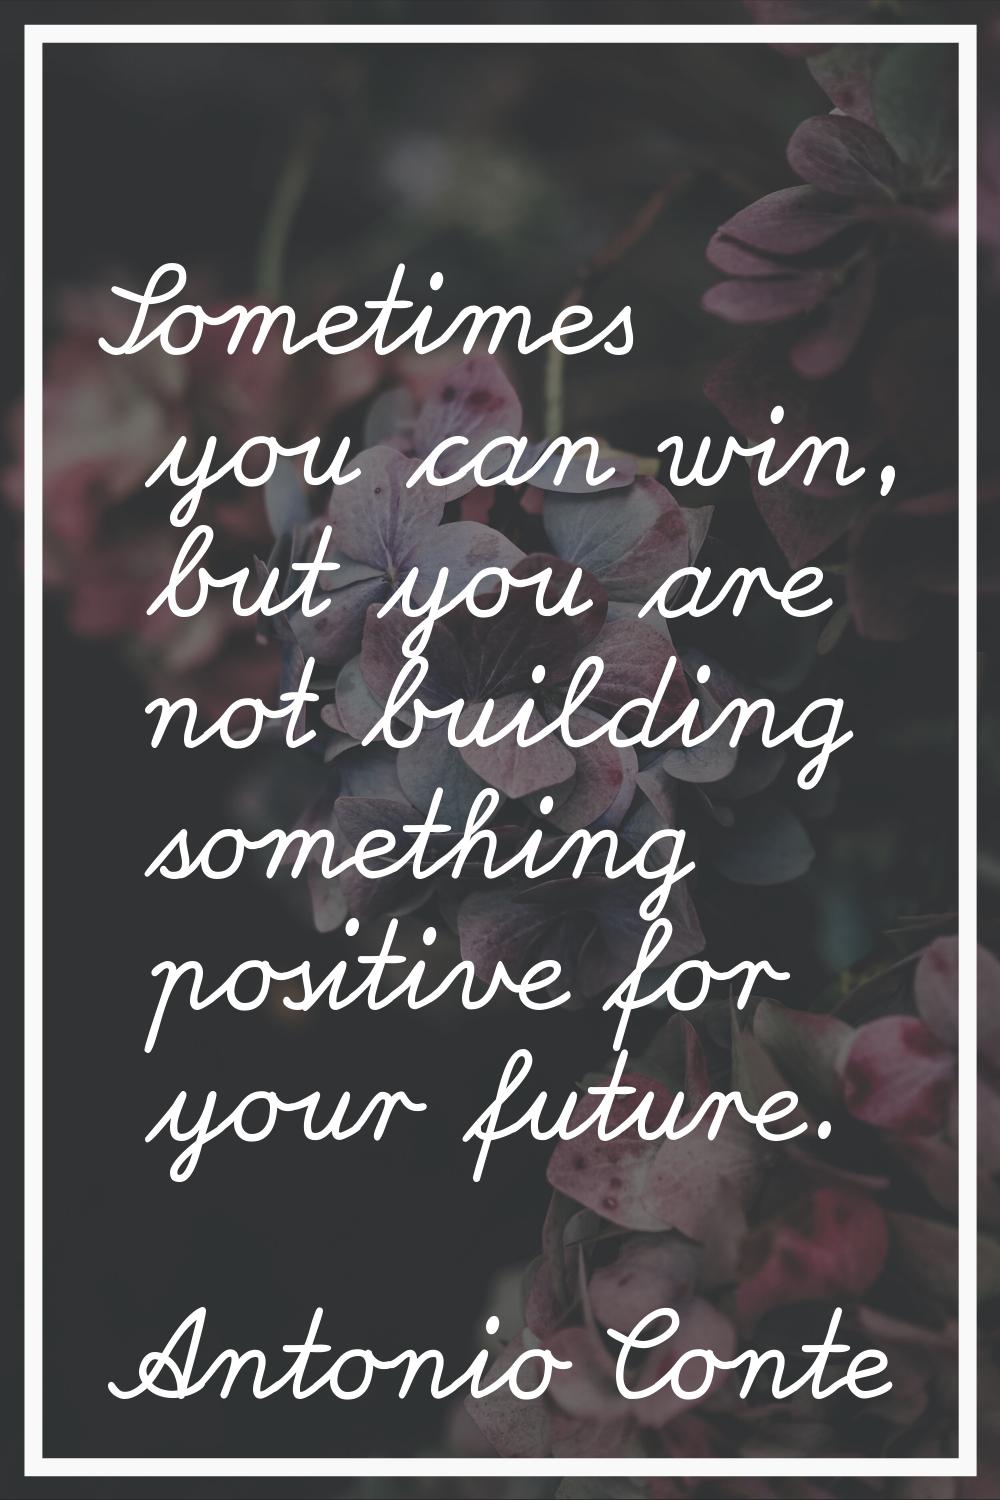 Sometimes you can win, but you are not building something positive for your future.